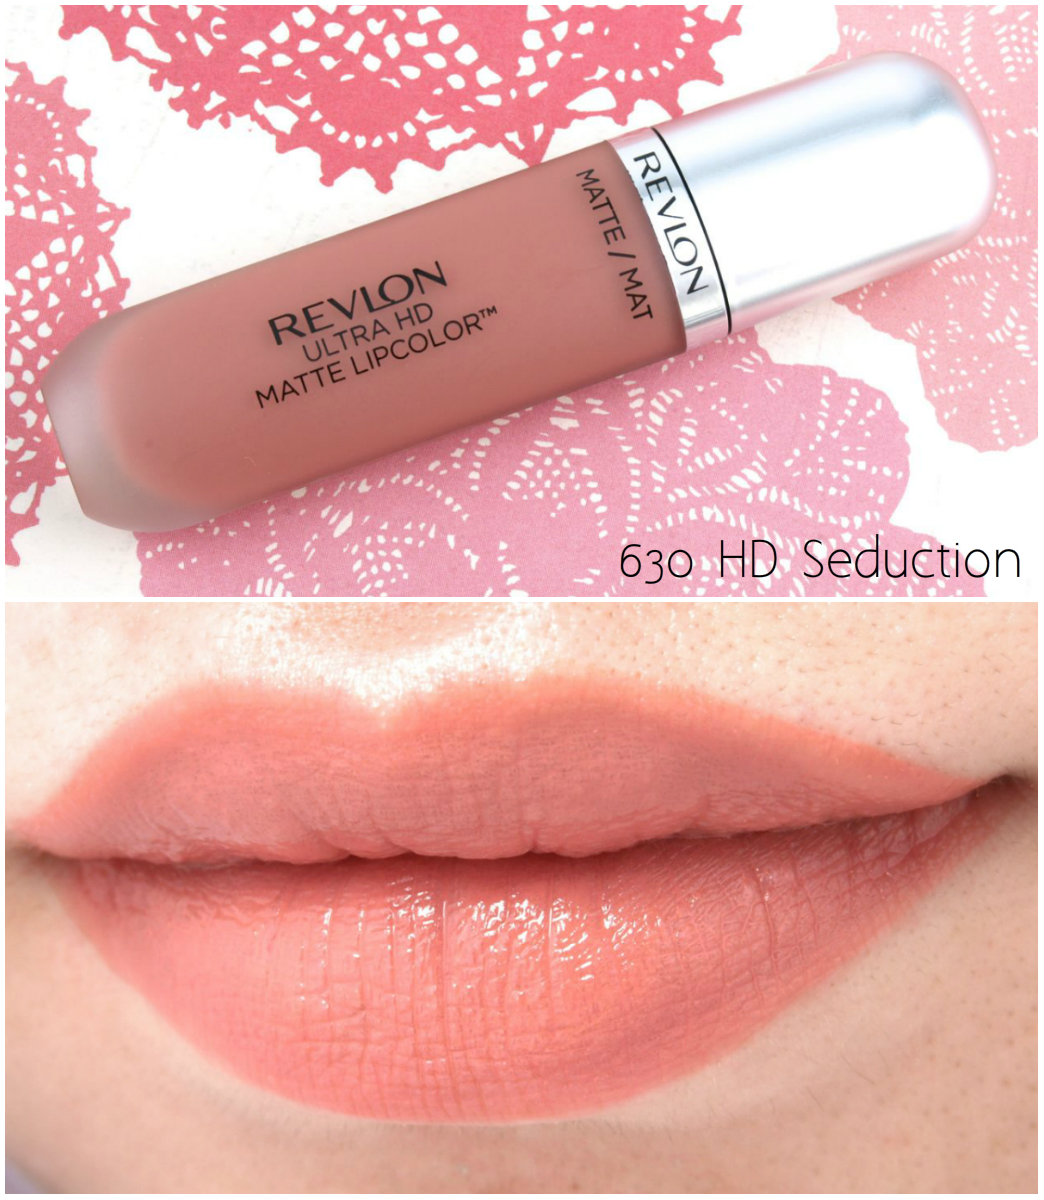 agentschap Weigeren Natte sneeuw Revlon Ultra HD Matte Lipcolor in "Passion", "Seduction" & "Temptation":  Review and Swatches | The Happy Sloths: Beauty, Makeup, and Skincare Blog  with Reviews and Swatches